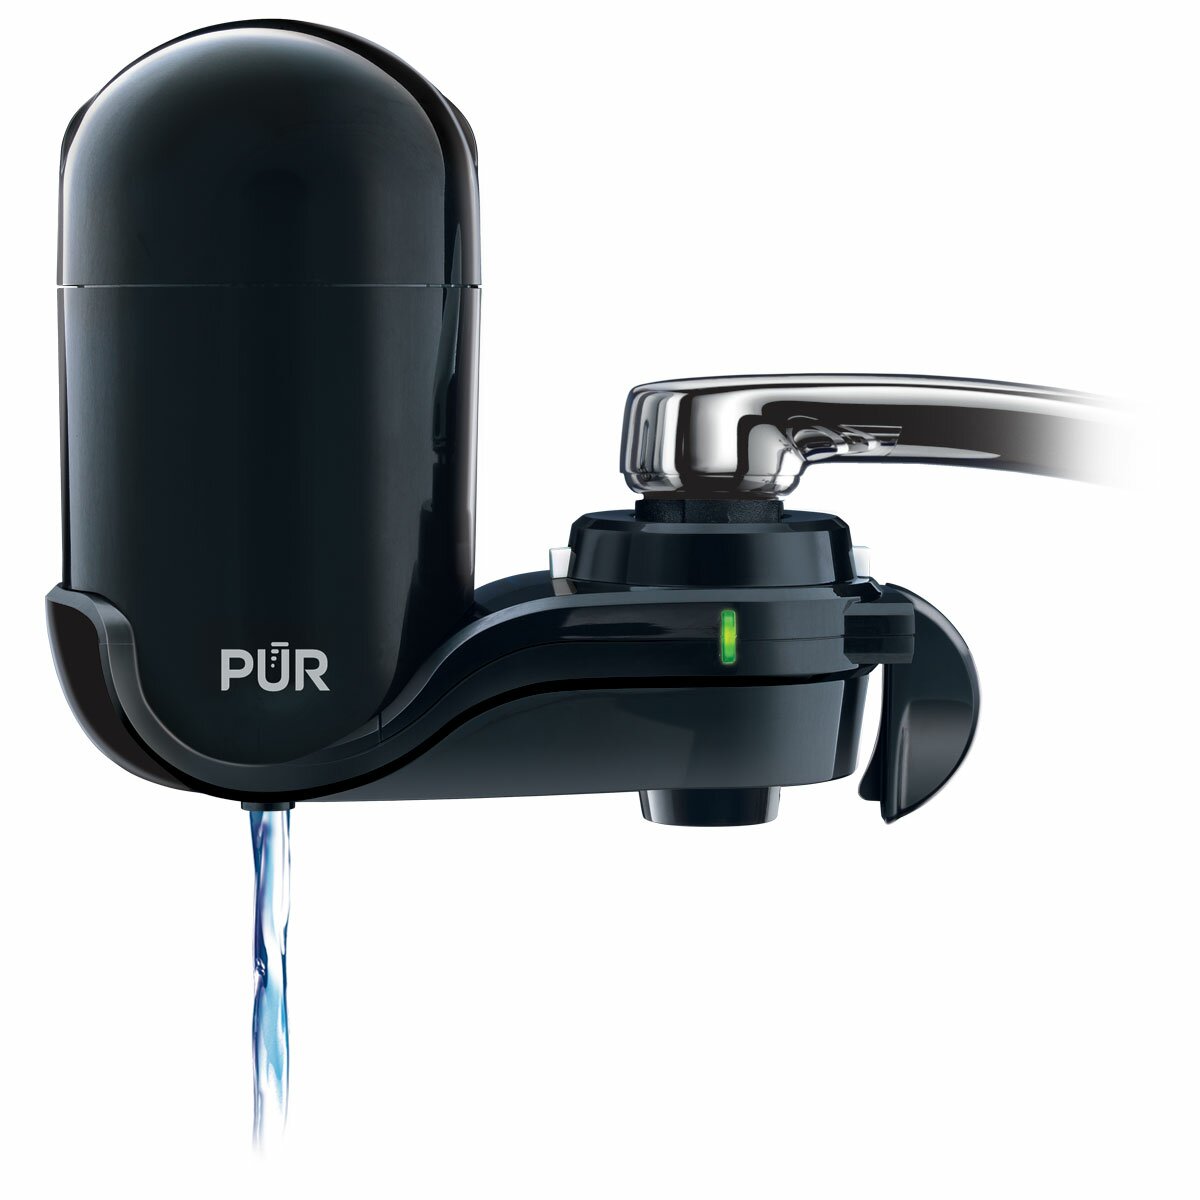 PUR Basic Water Faucet Filtration System 